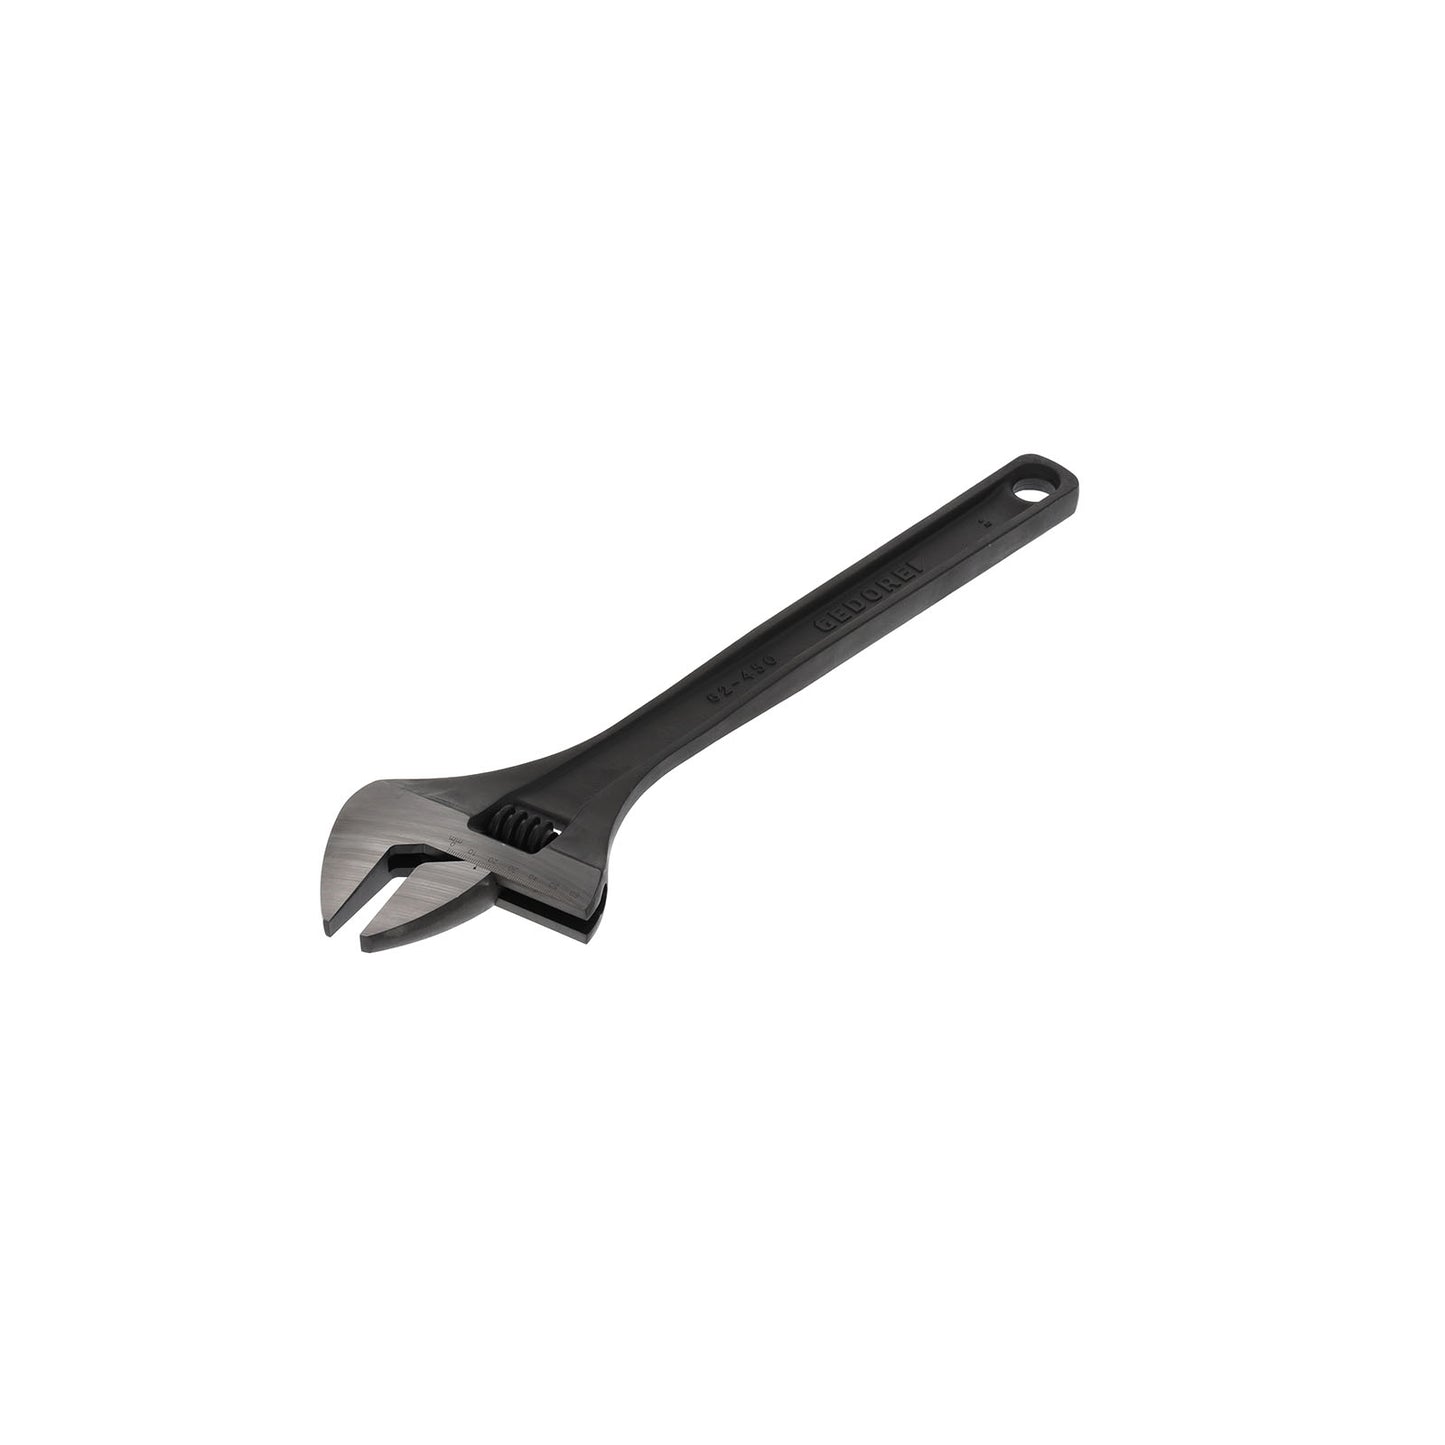 GEDORE 62 P 18 - Phosphated Adjustable Wrench, 18" (6368510)